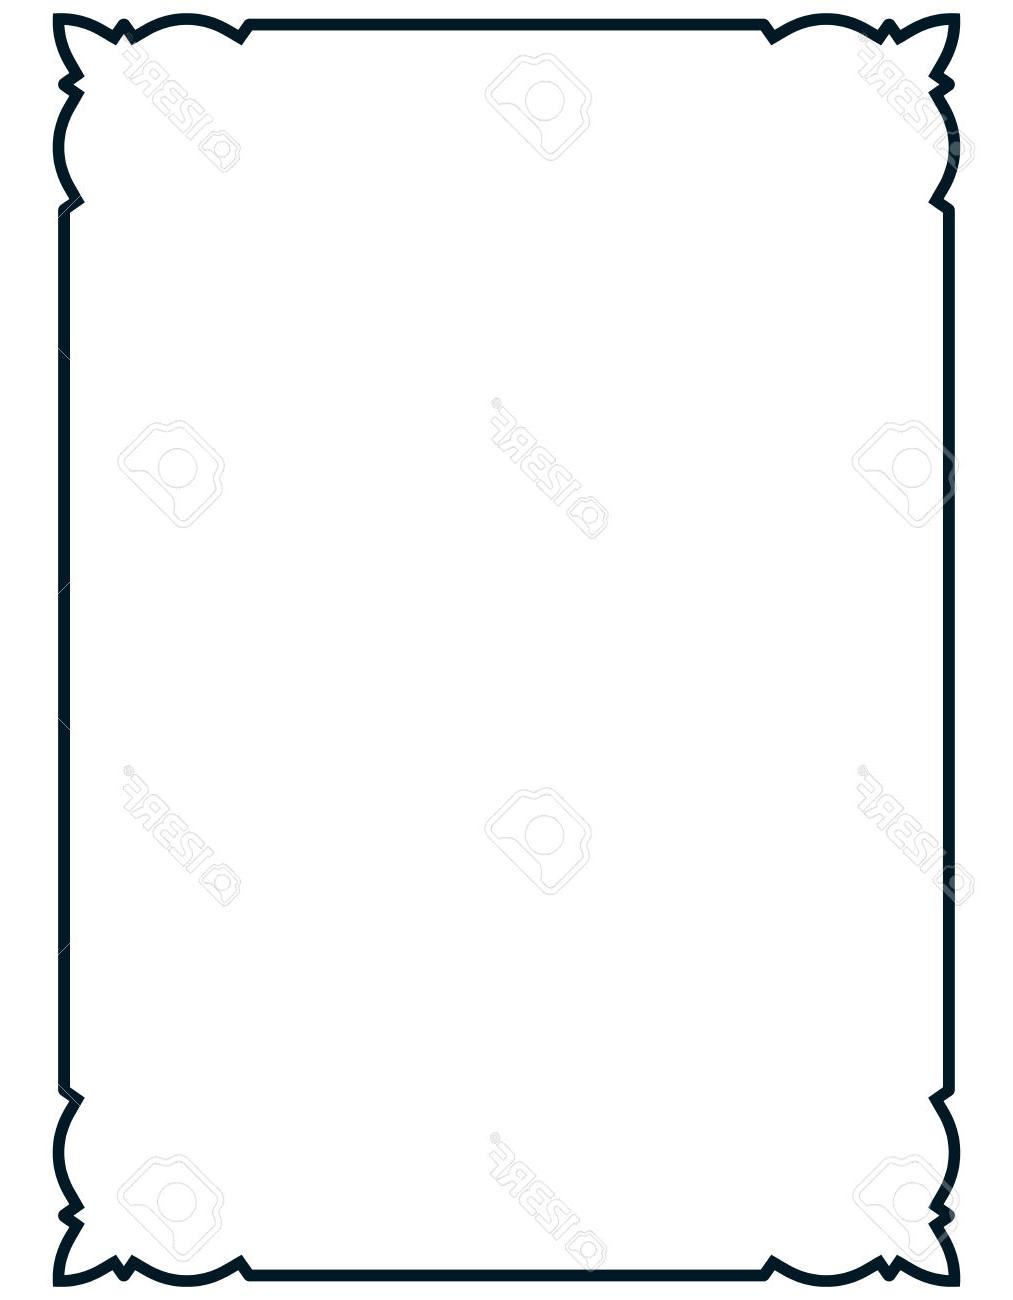 Printable Page Borders And Border Clip Art For Kids. Free Downloads In Gif, Jpg, Pdf, And Png Formats. Ai And Eps Files Also Available. - Borders, Transparent background PNG HD thumbnail